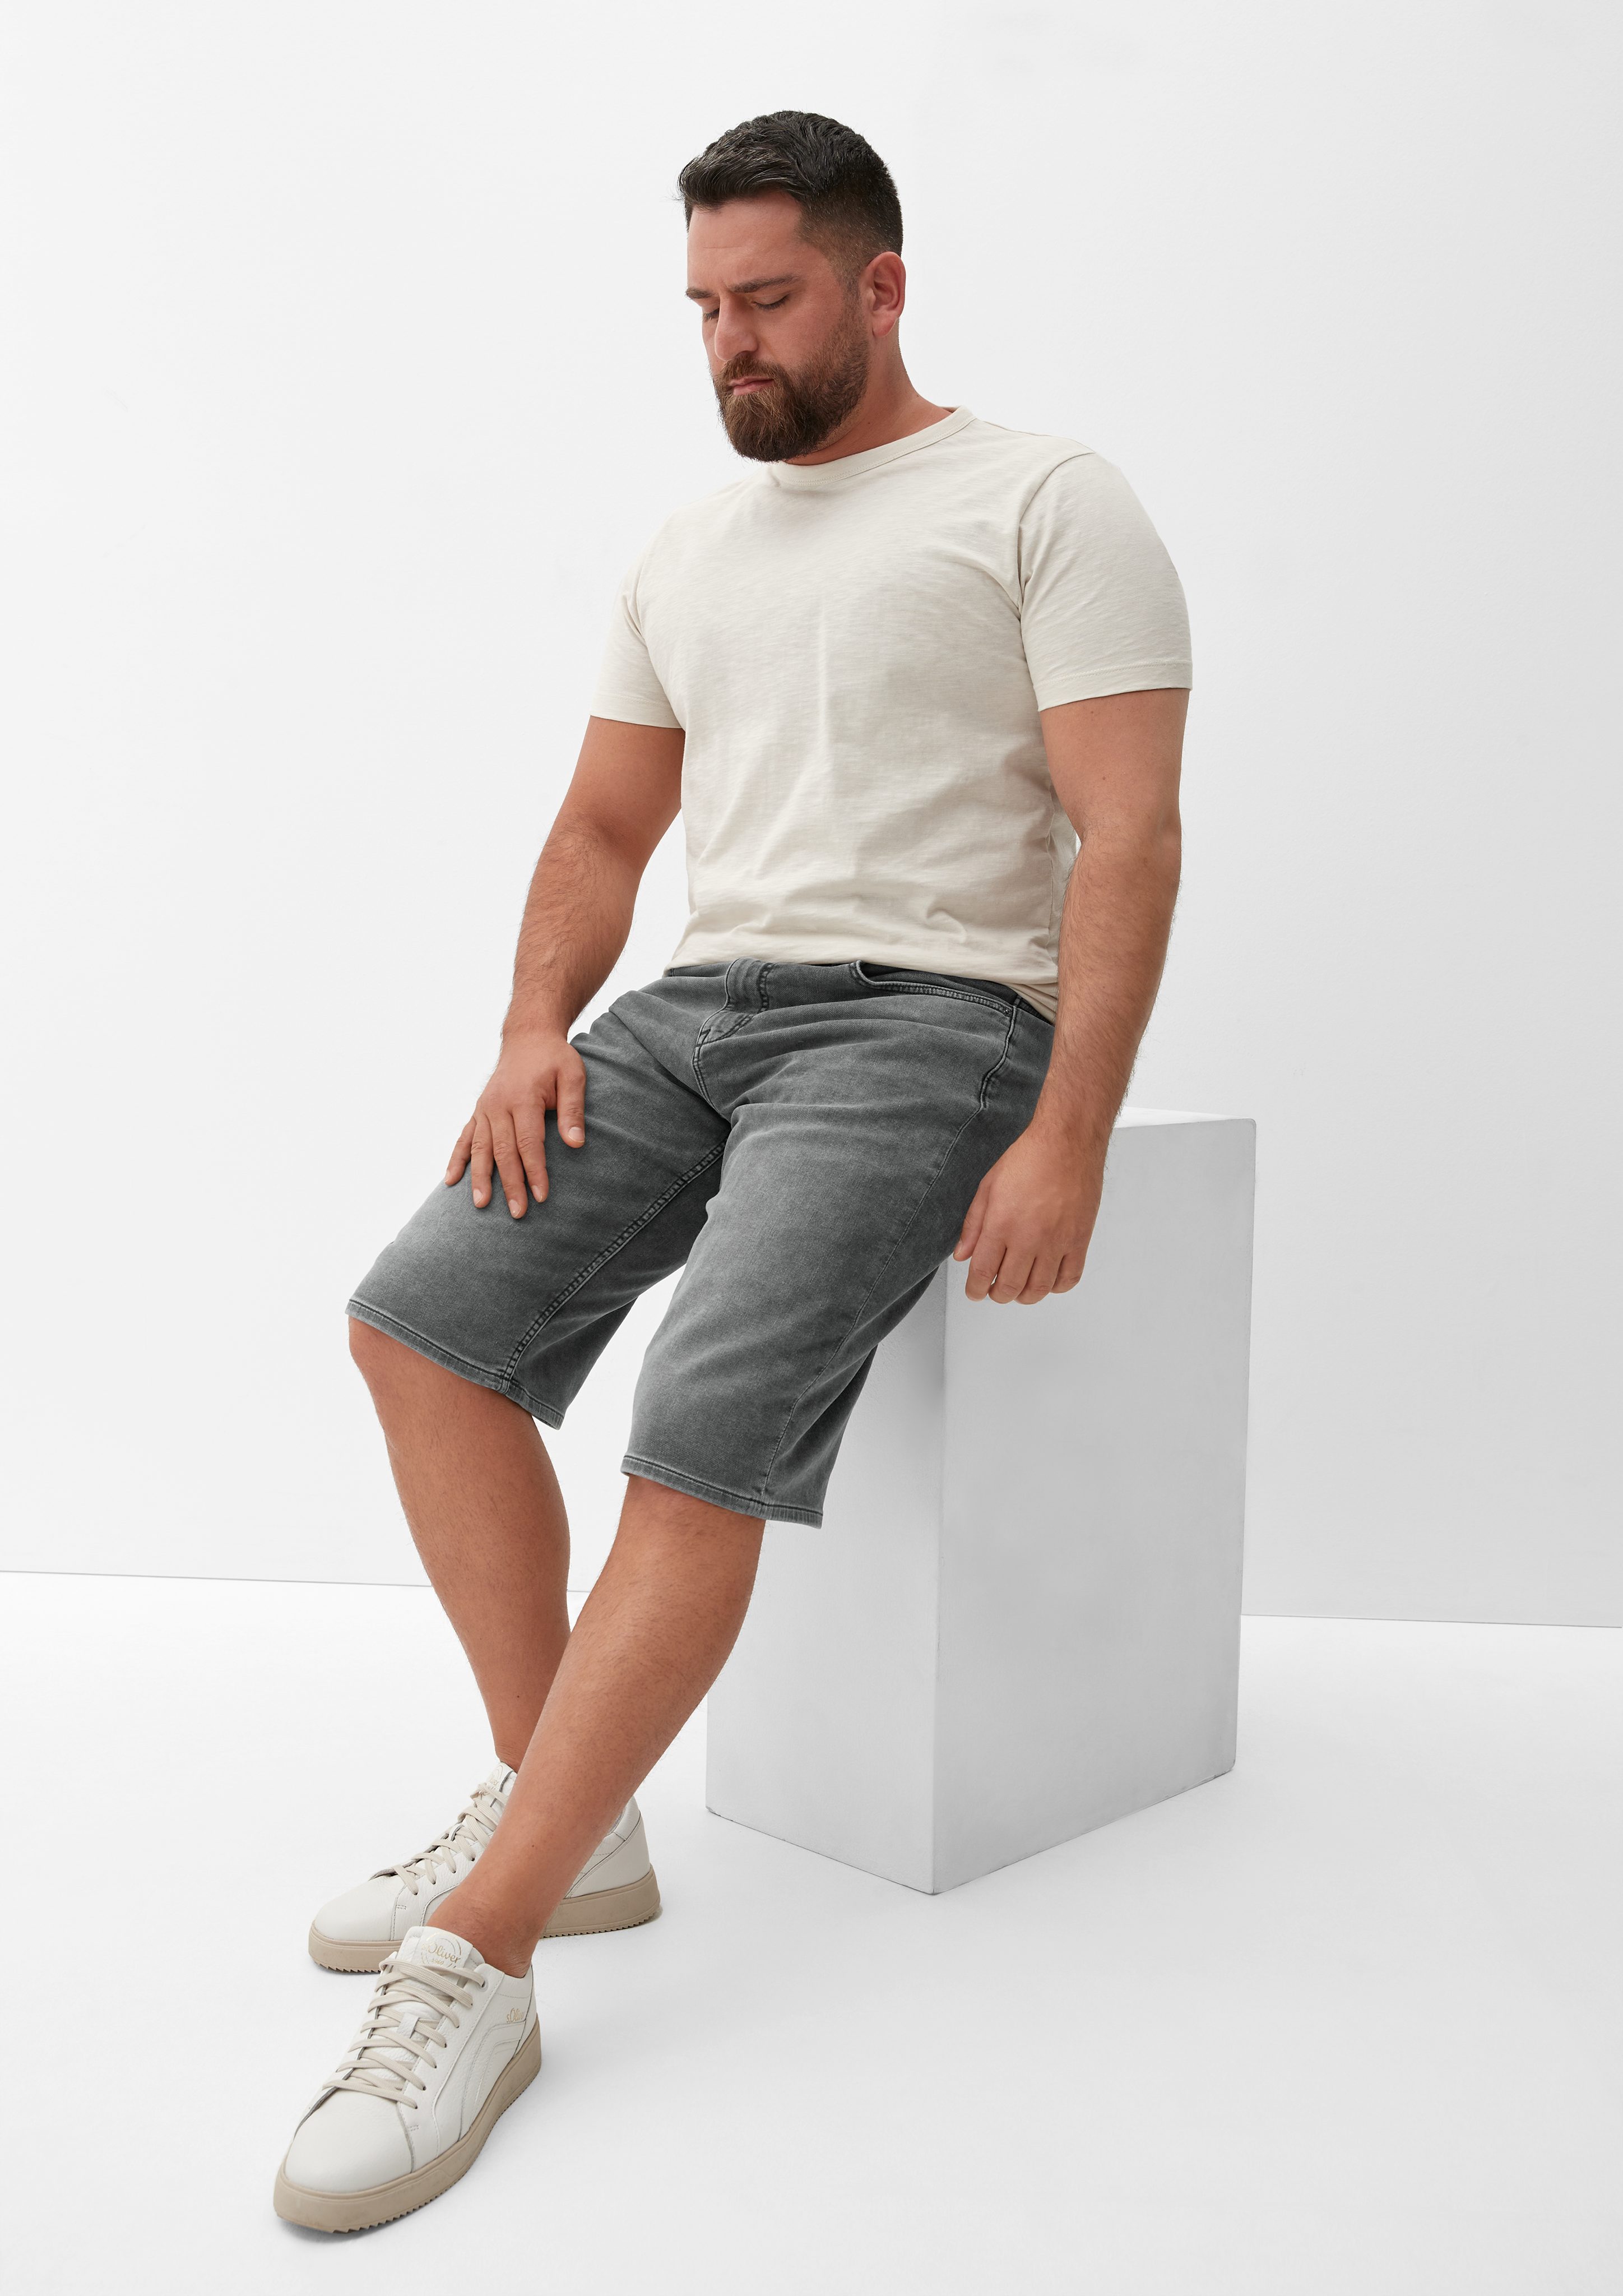 / Rise Jeansshorts Relaxed steingrau Casby Leg Fit / s.Oliver / Mid Jeans-Shorts Straight